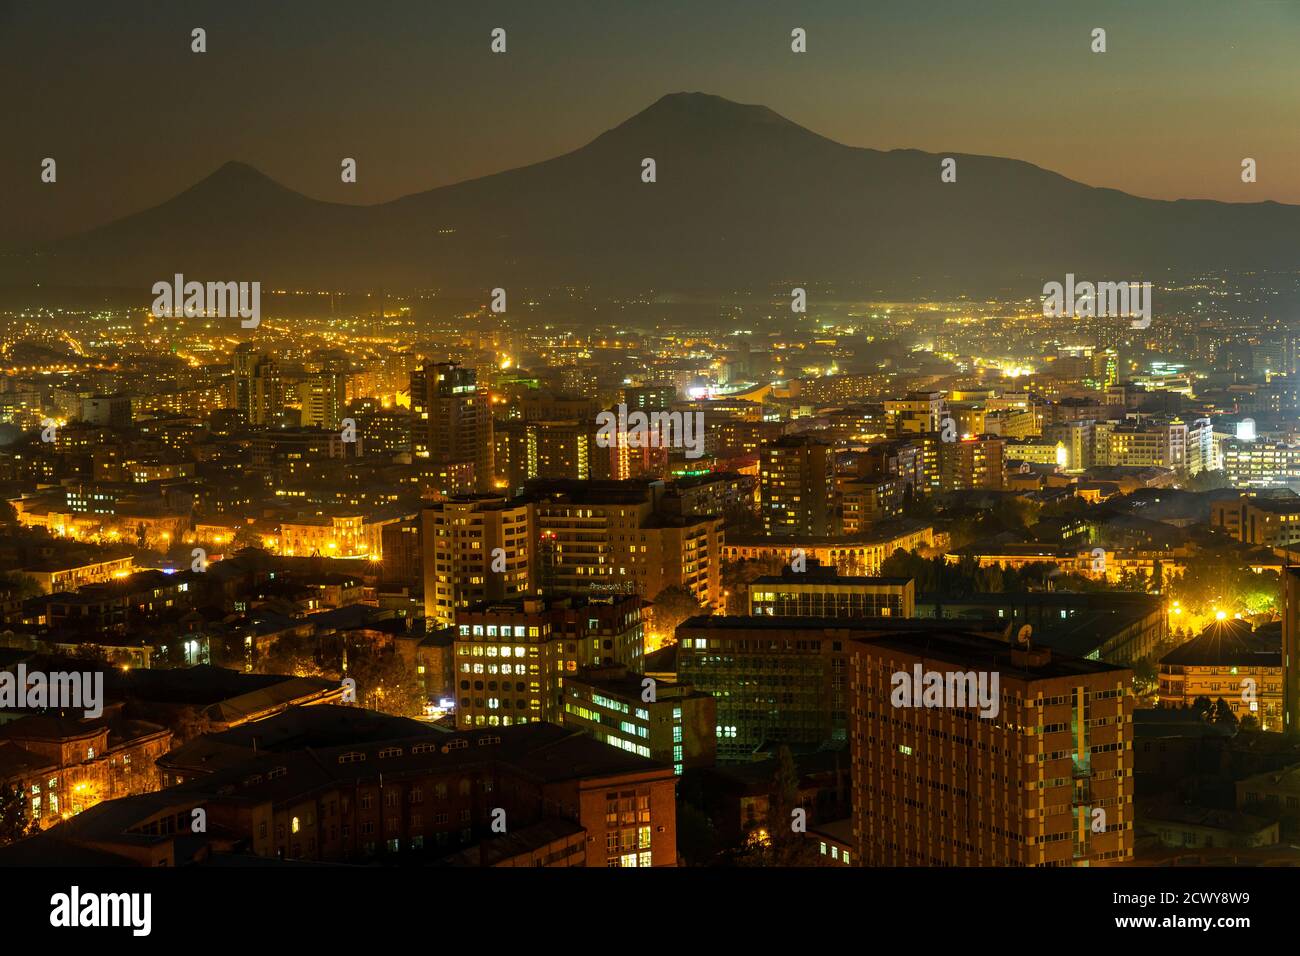 City views of the Armenian capital Yerevan Armenia with Mount Ararat in the background, which is on the Turkish side. Stock Photo